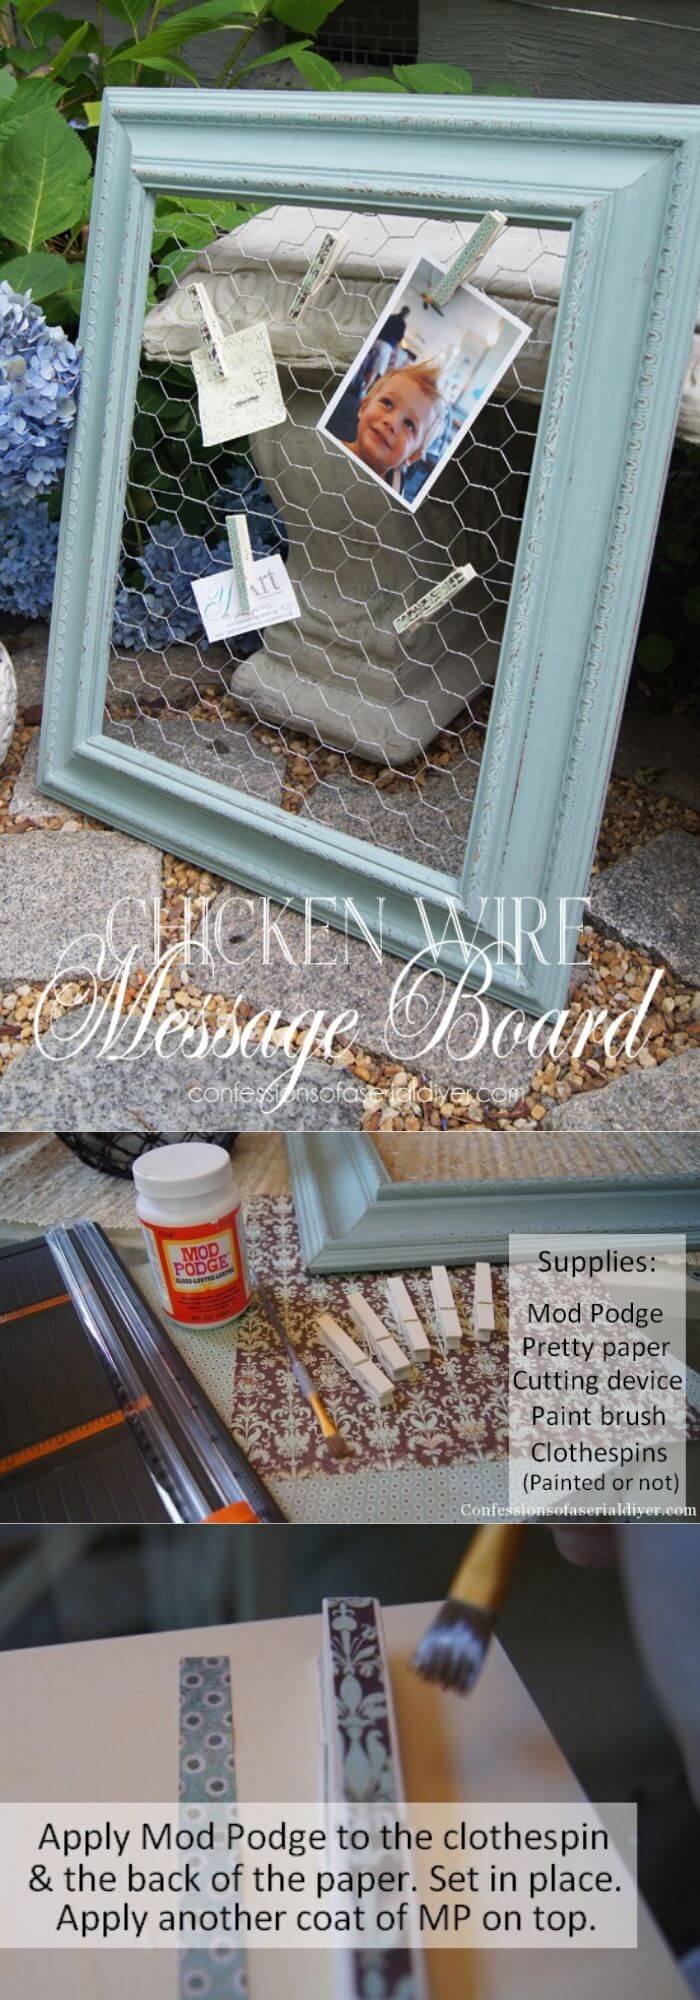 9 chicken wire projects